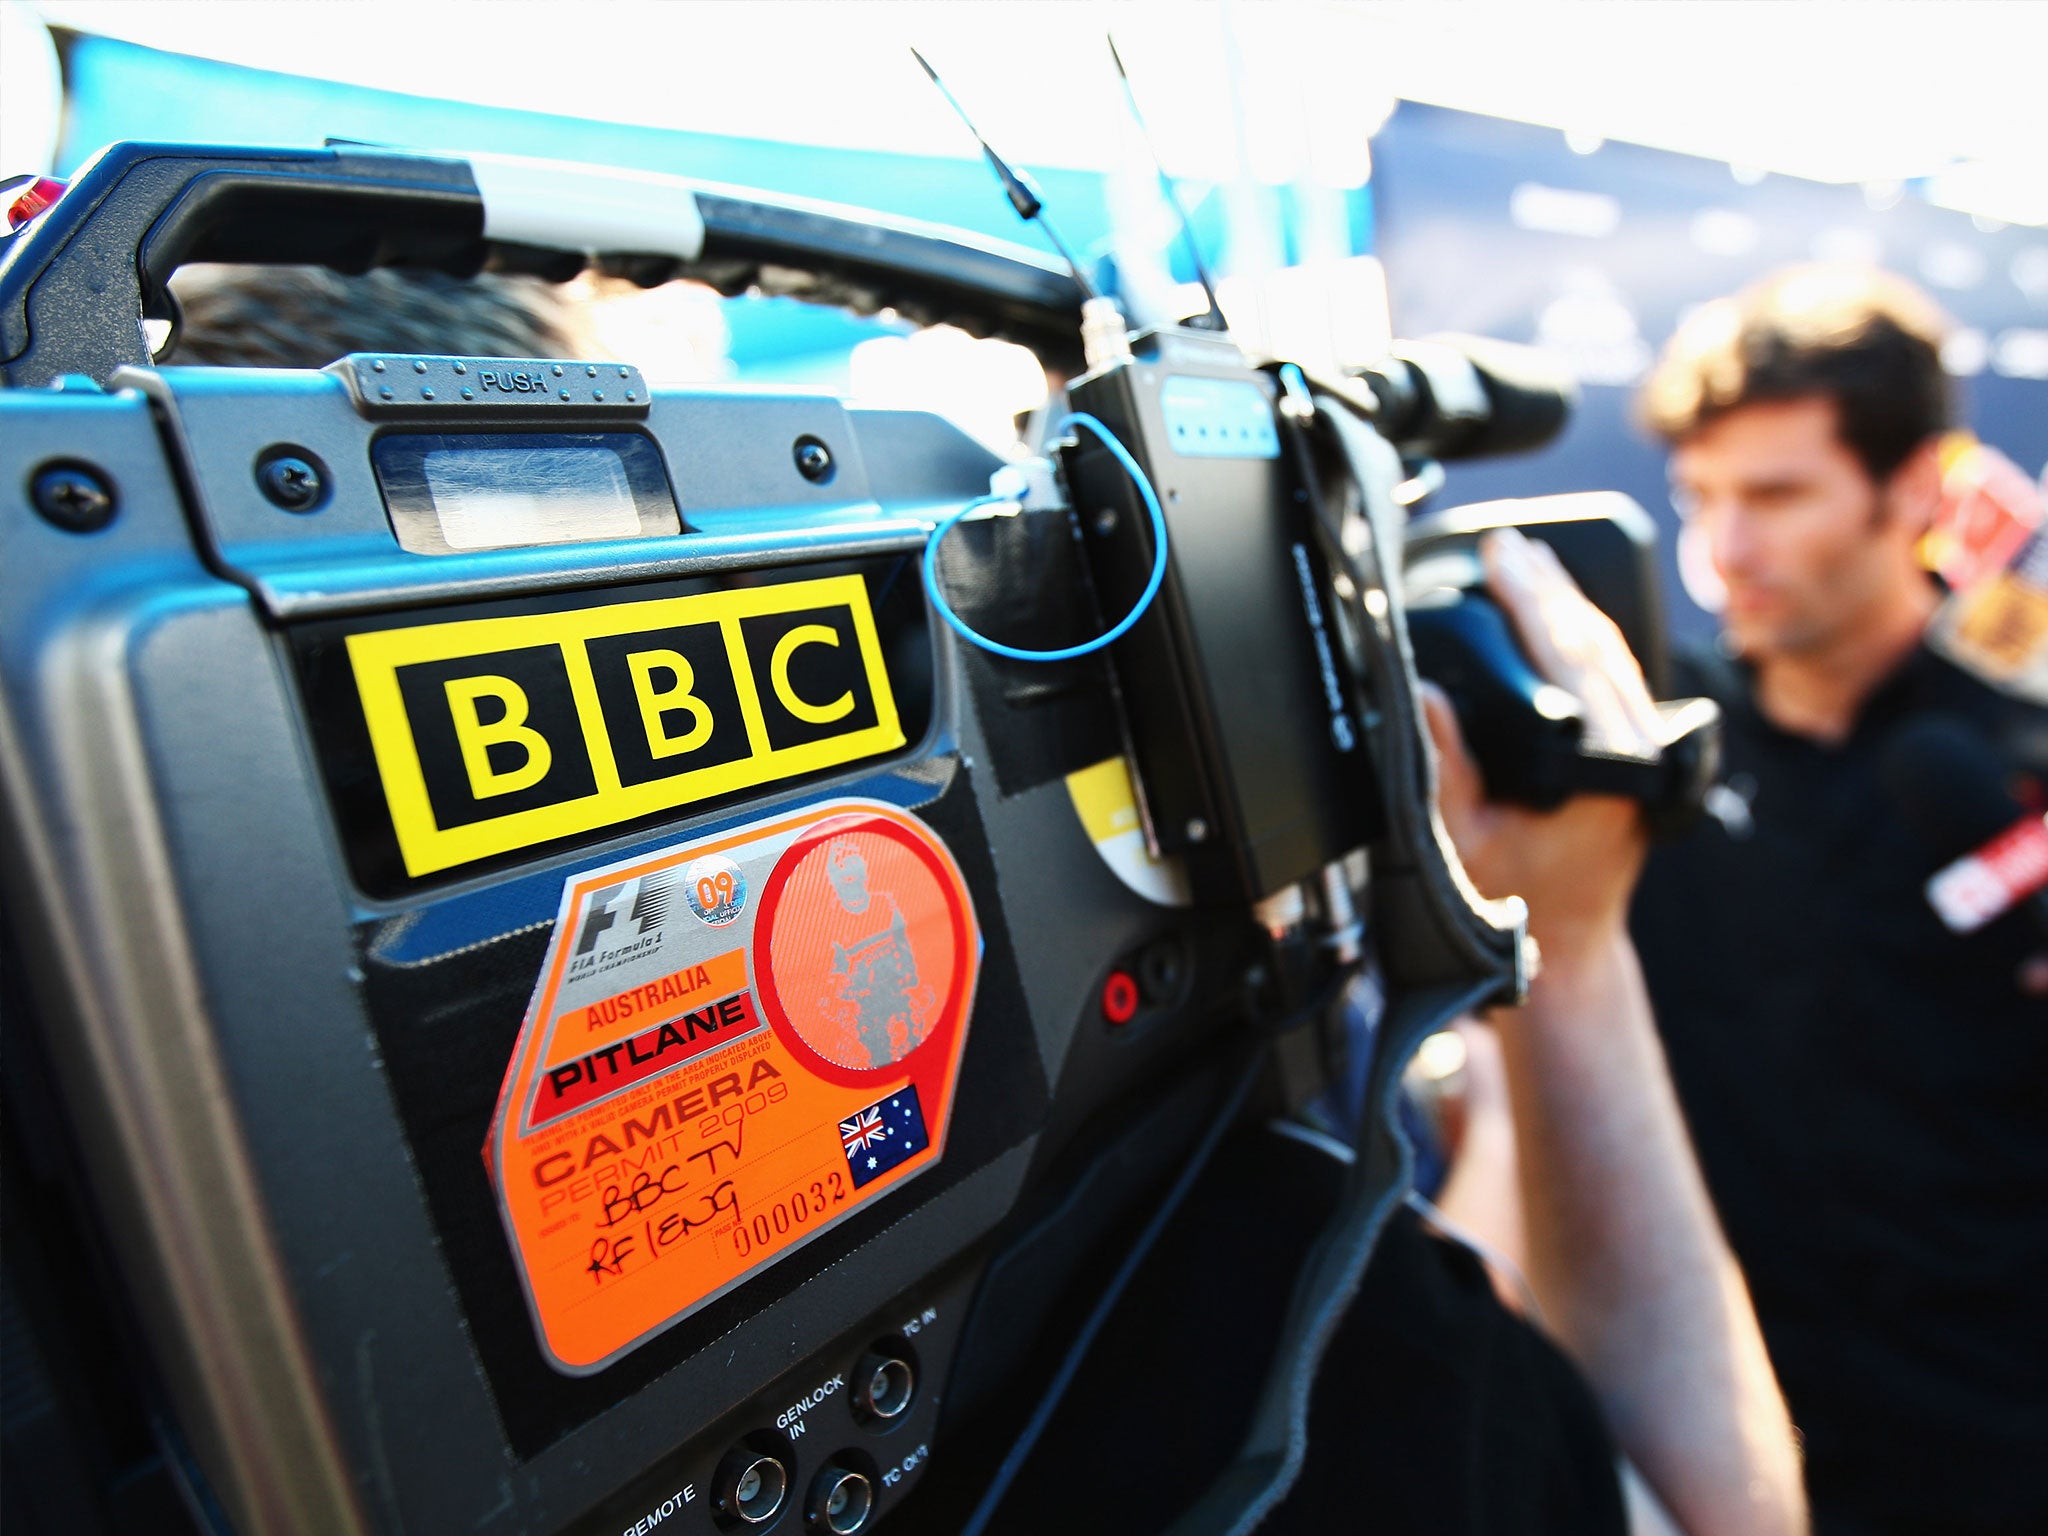 Around 2,500 staff at the publicly-funded broadcaster are understood to earn less than £20,000